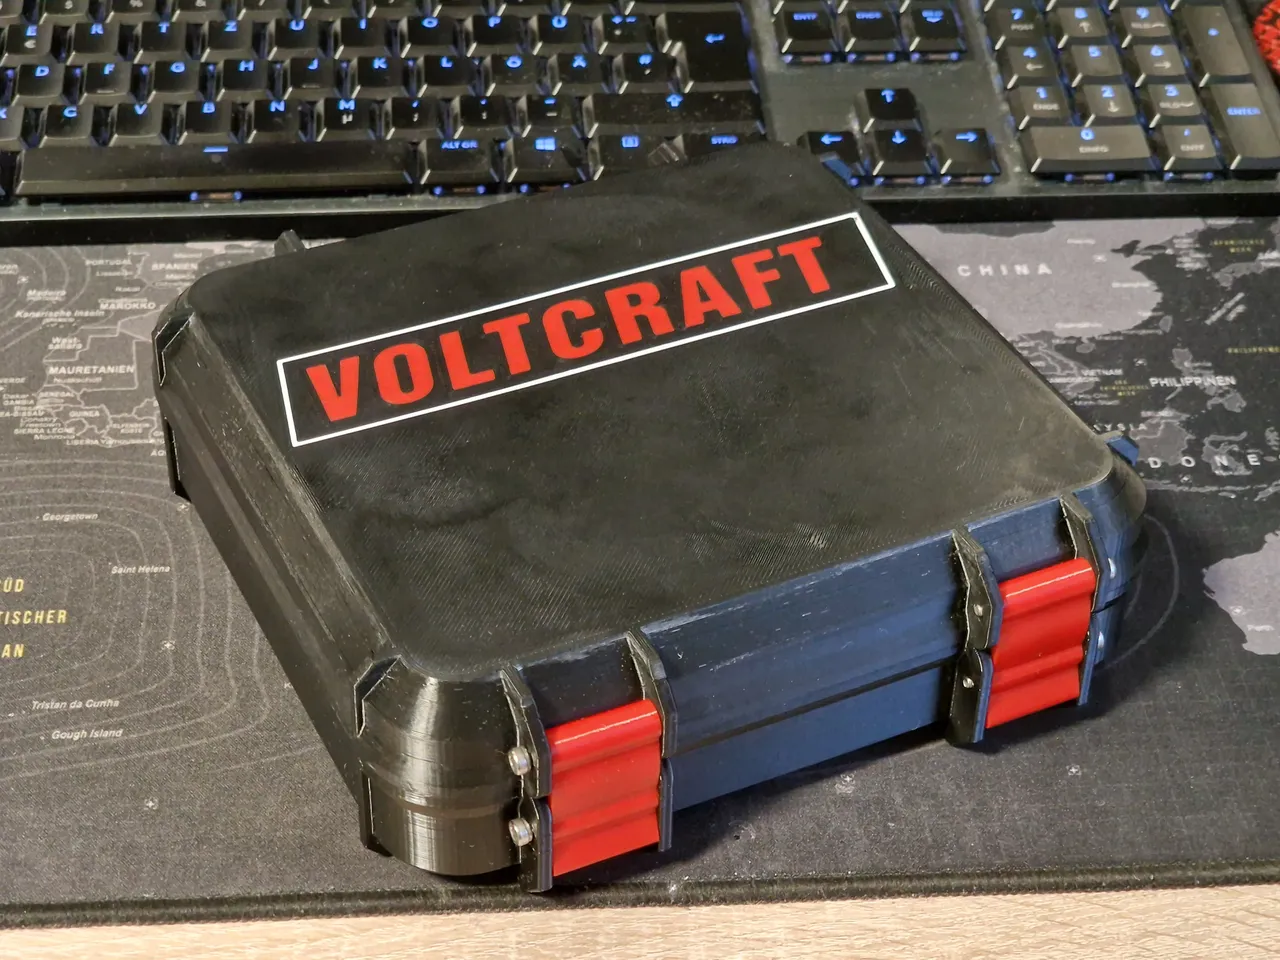 Rugged Box for Voltcraft MT-52 and similiar by Oachkatzl